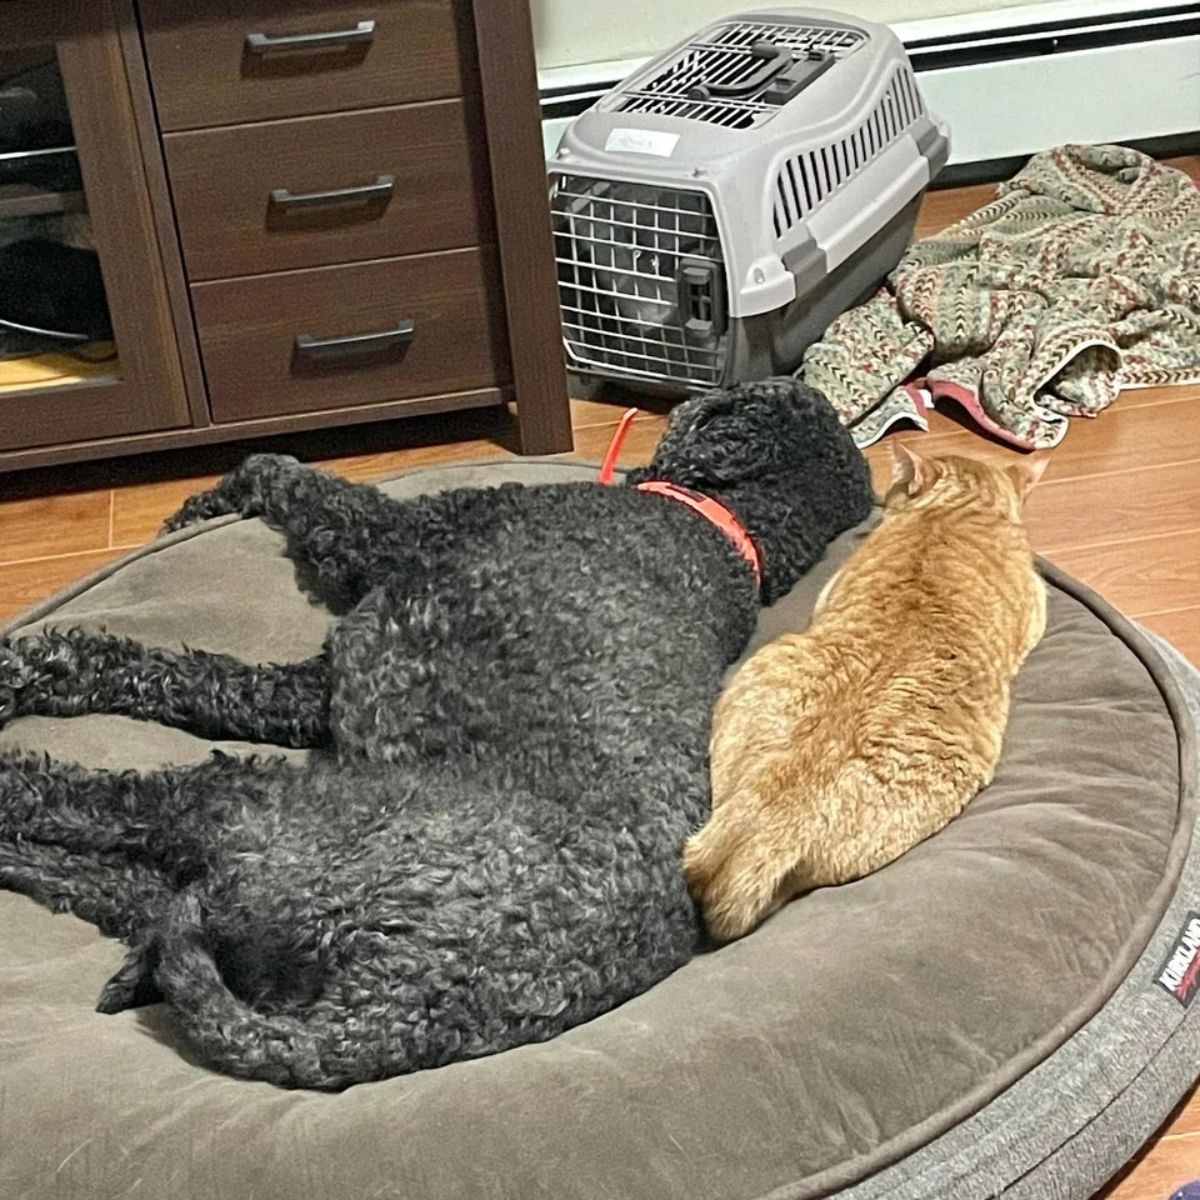 black poodle sleeping on a grey dog bed with an orange cat